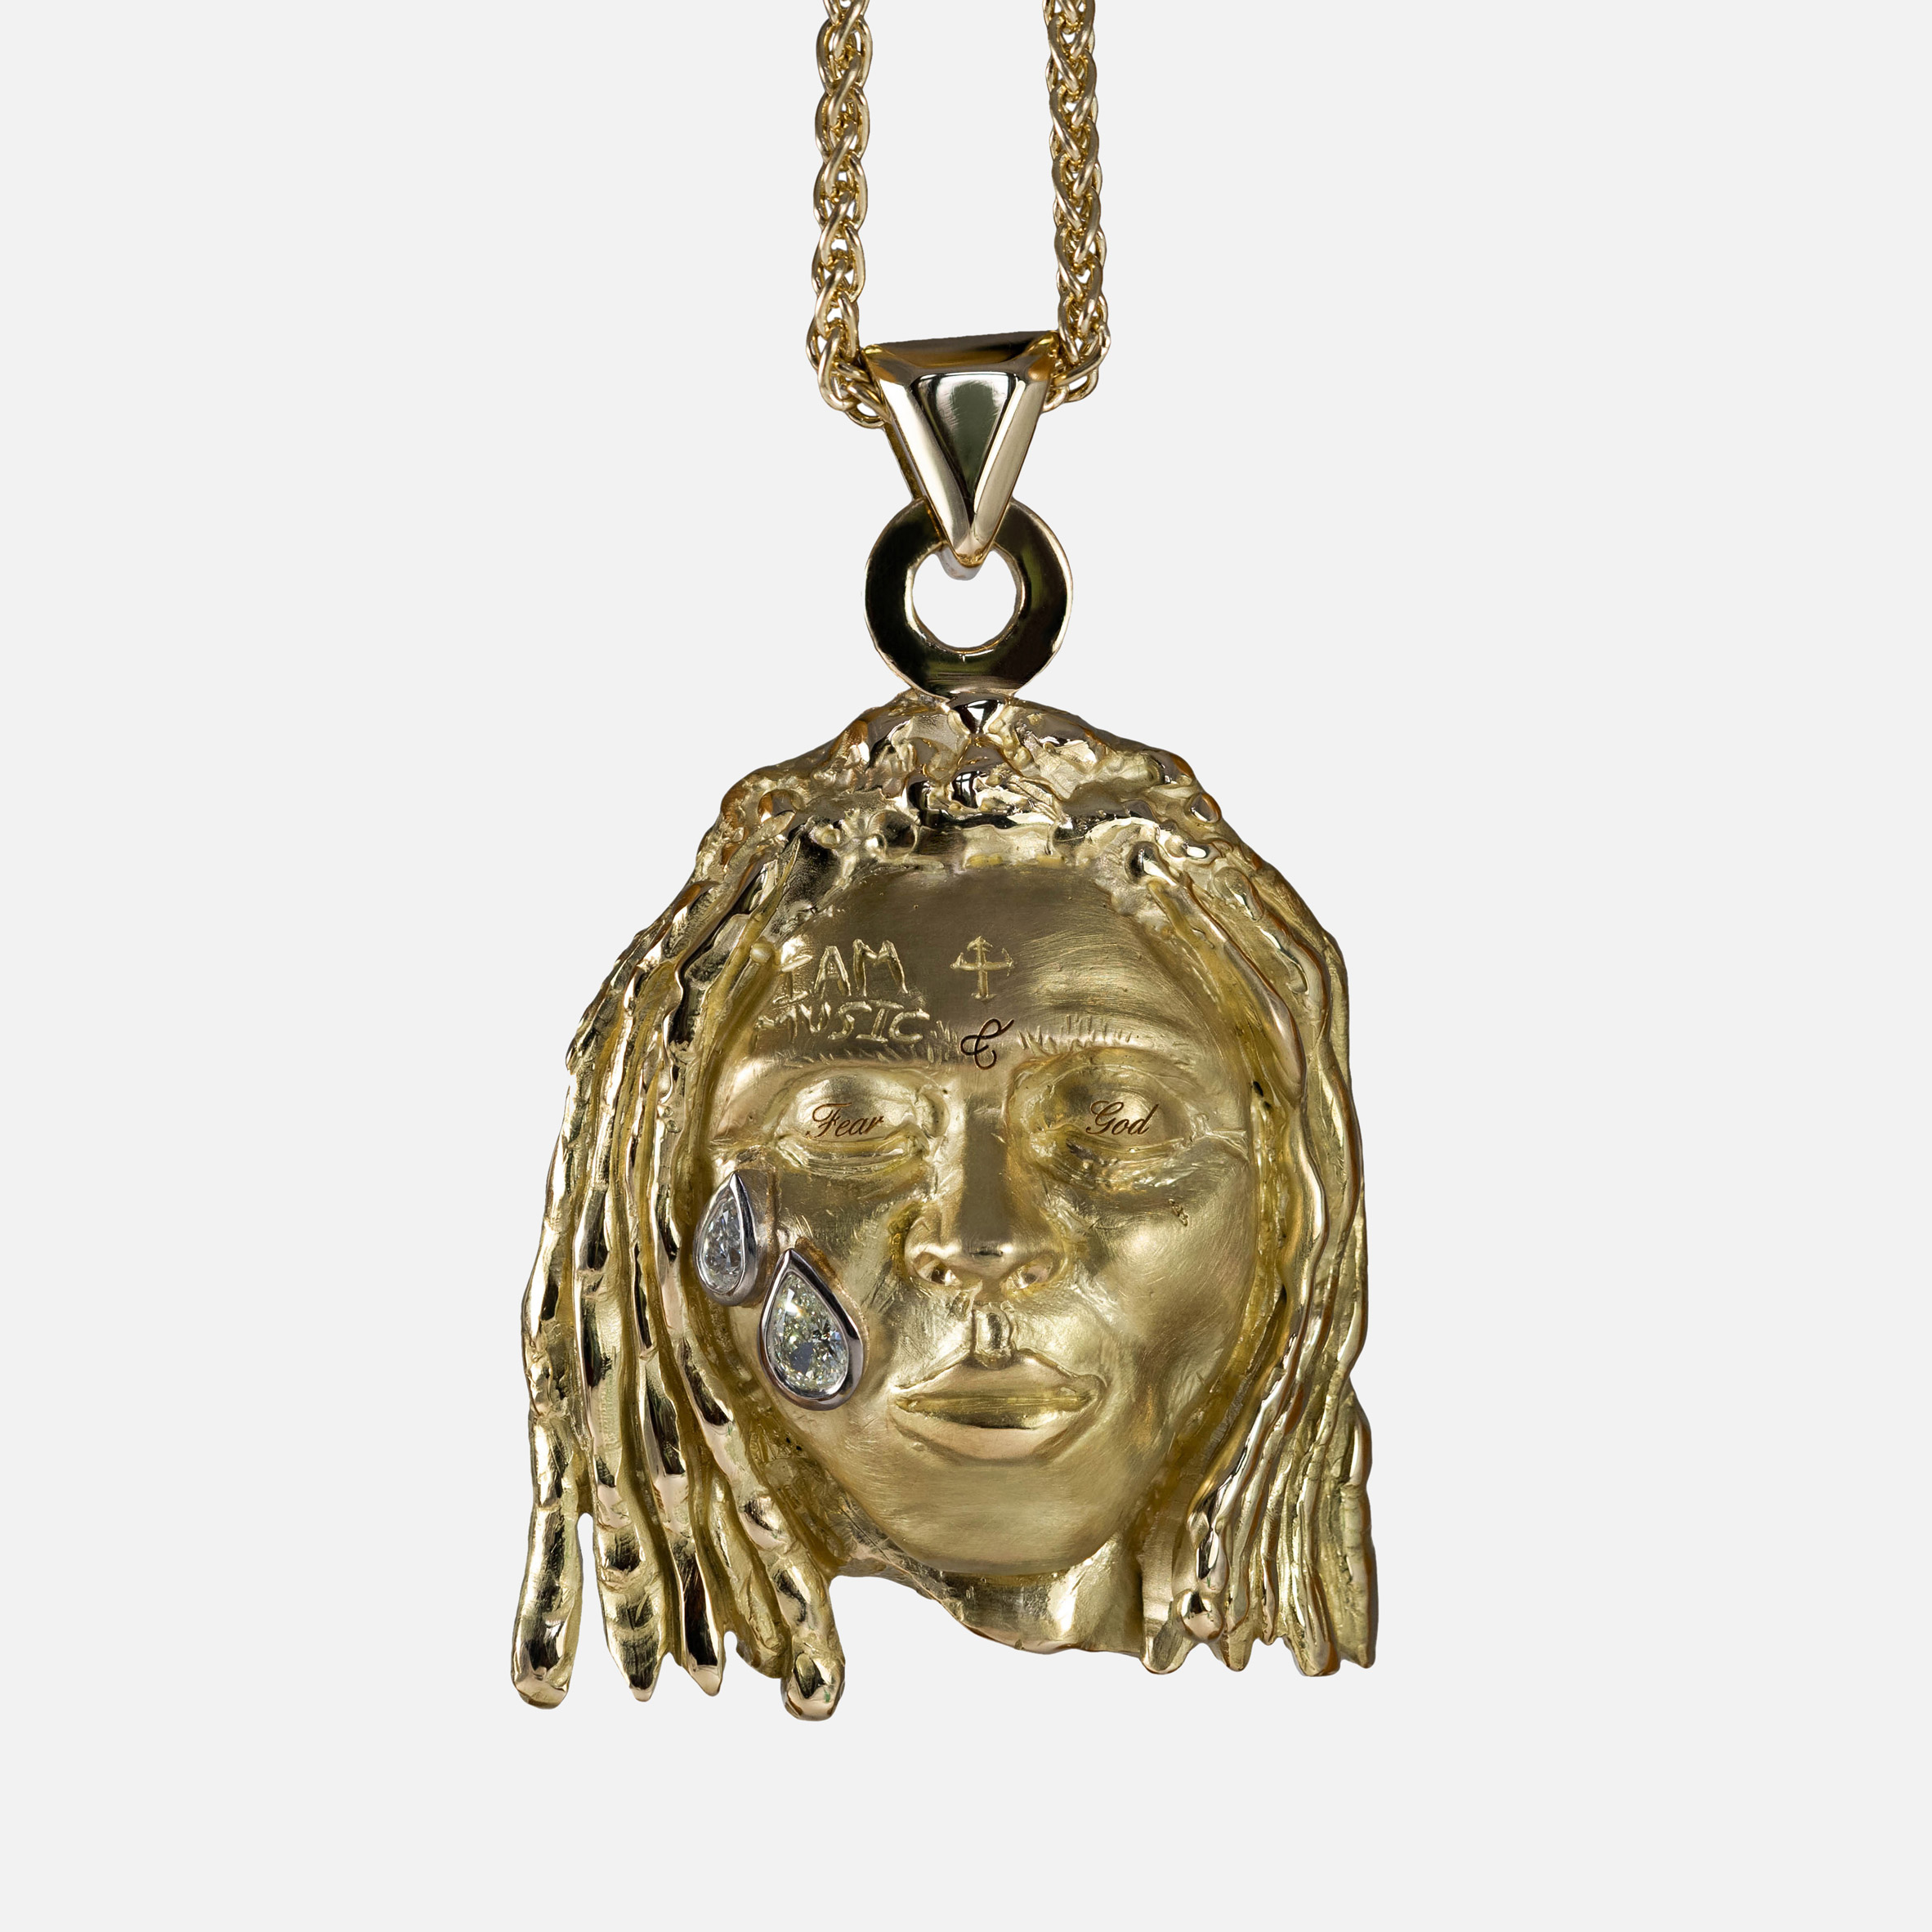 Joy BC pays off university fees with hand-carved pendant of Lil Wayne